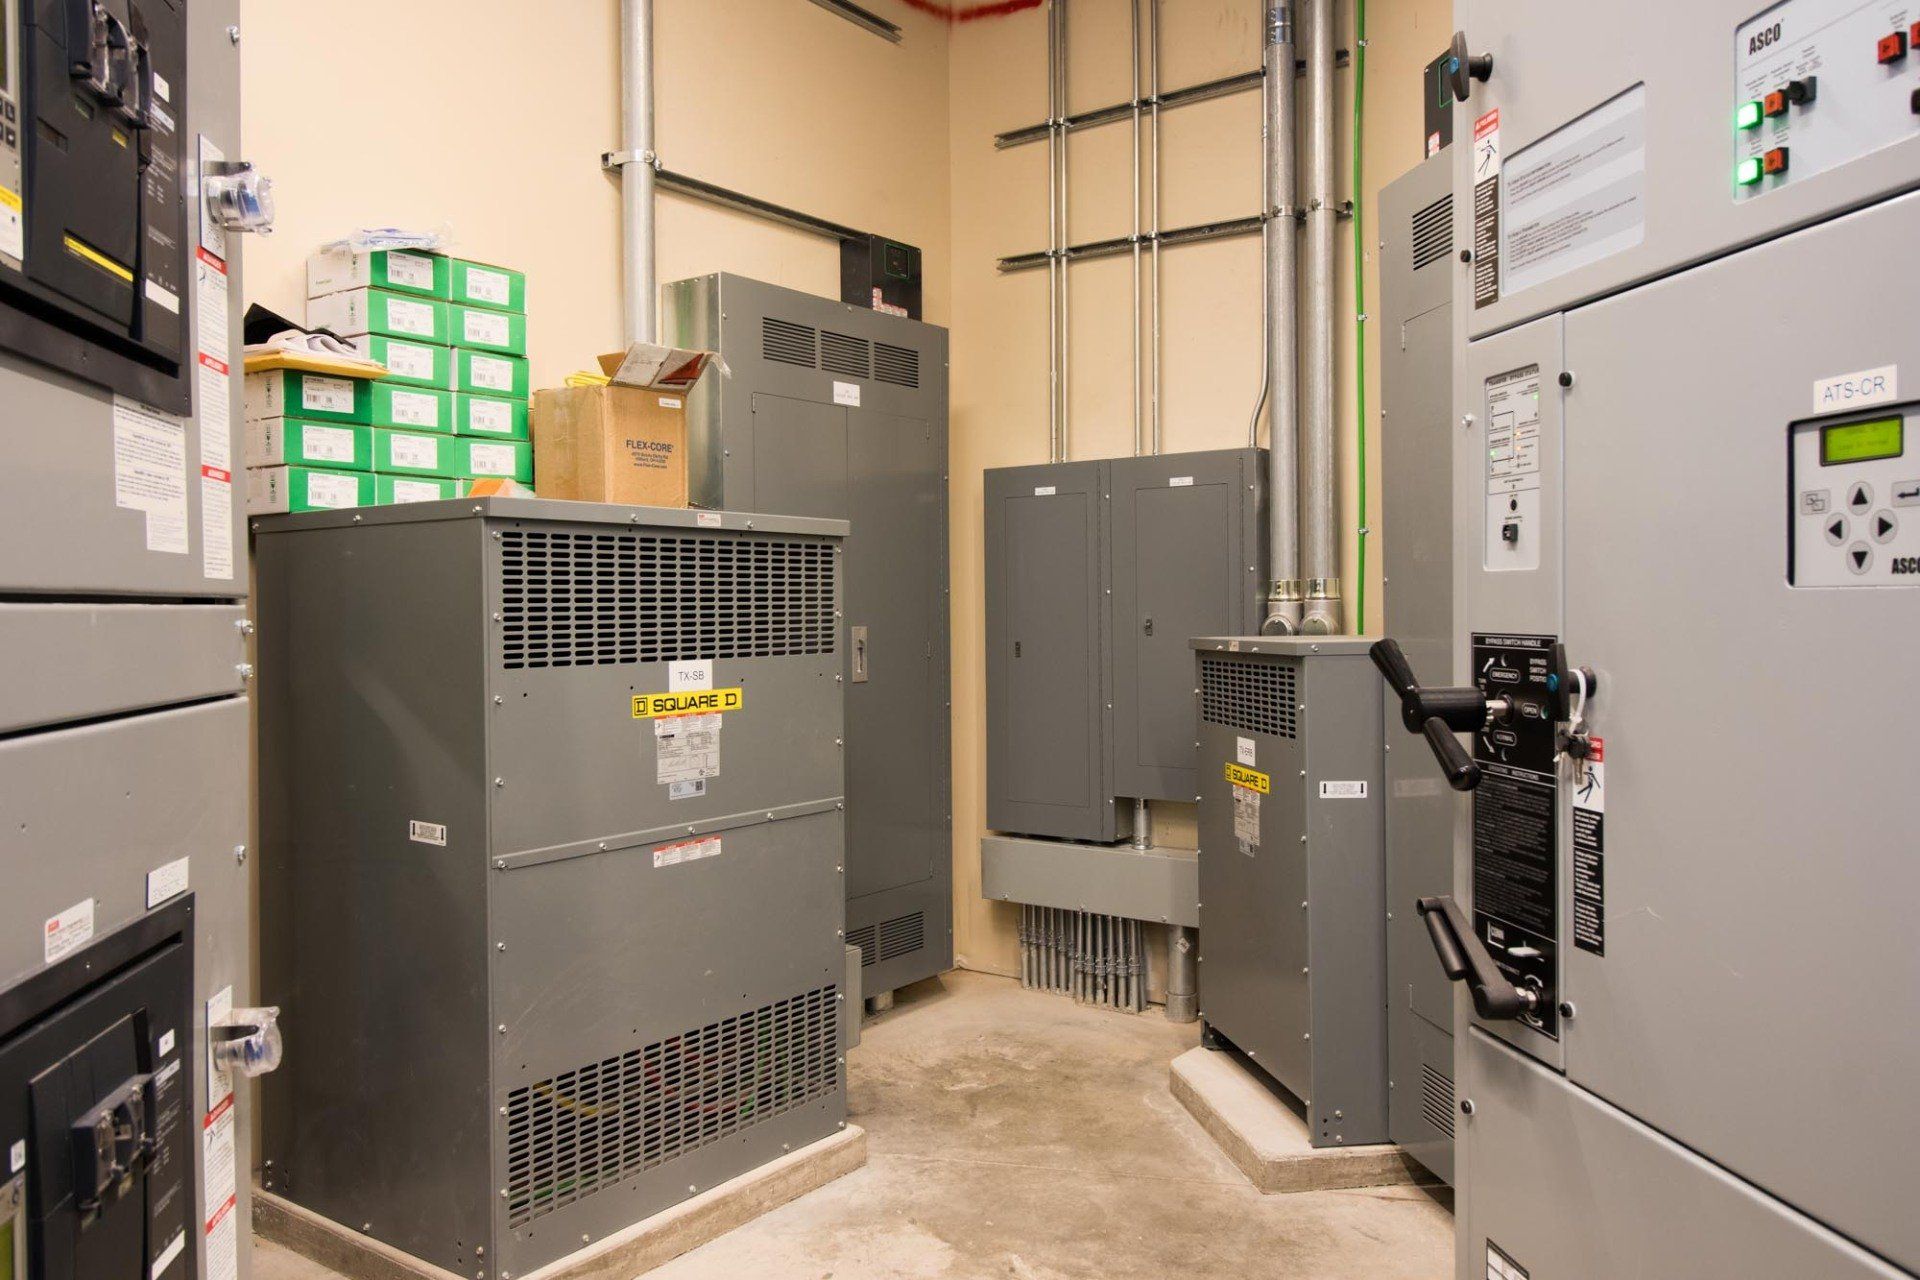 Electrical Room